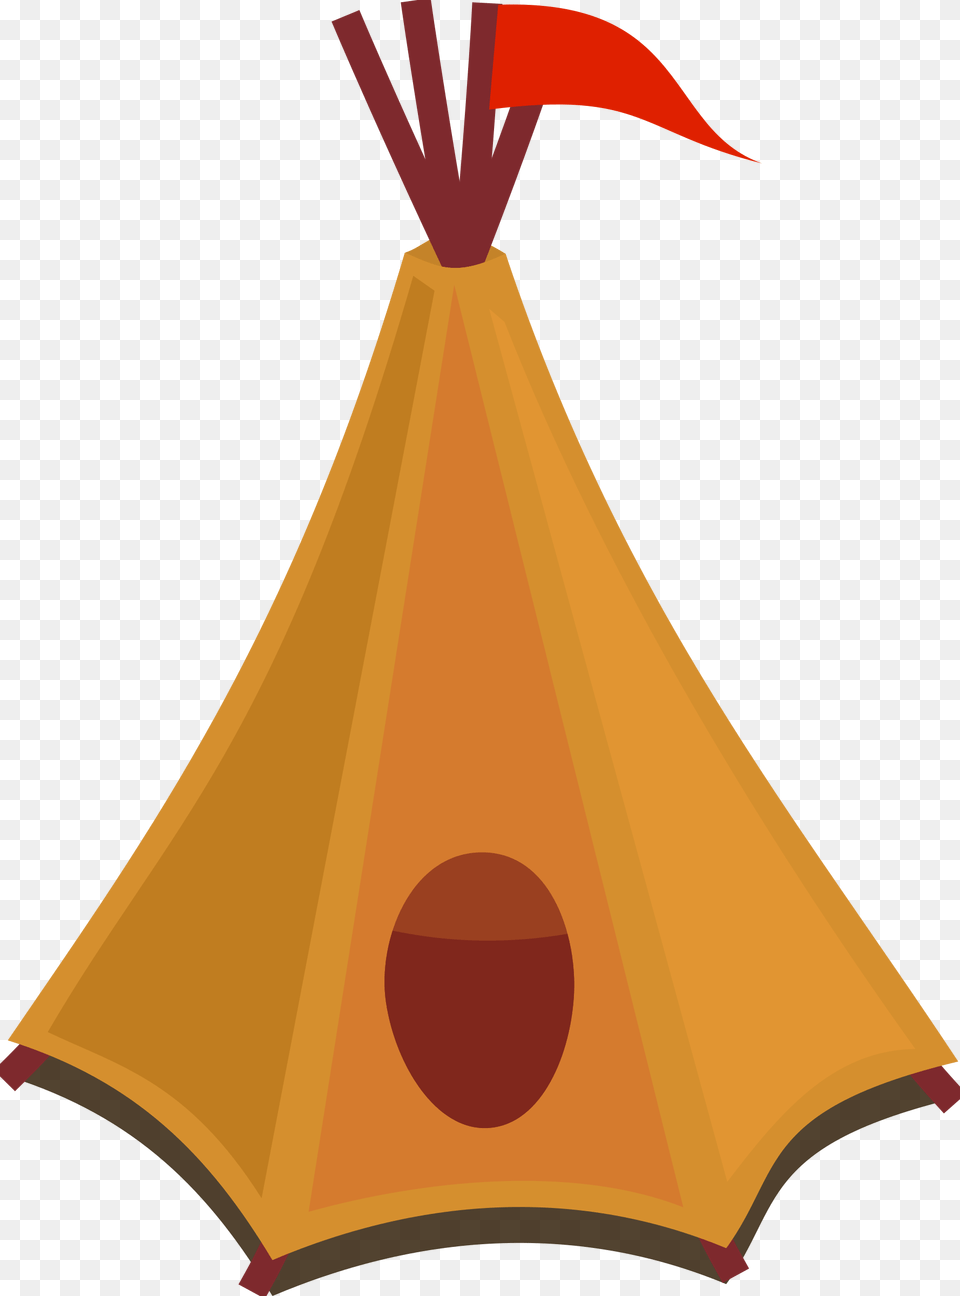 Cartoon Tipi Tent With Red Flag Clip Arts Cartoon Tent, Camping, Leisure Activities, Mountain Tent, Nature Free Png Download